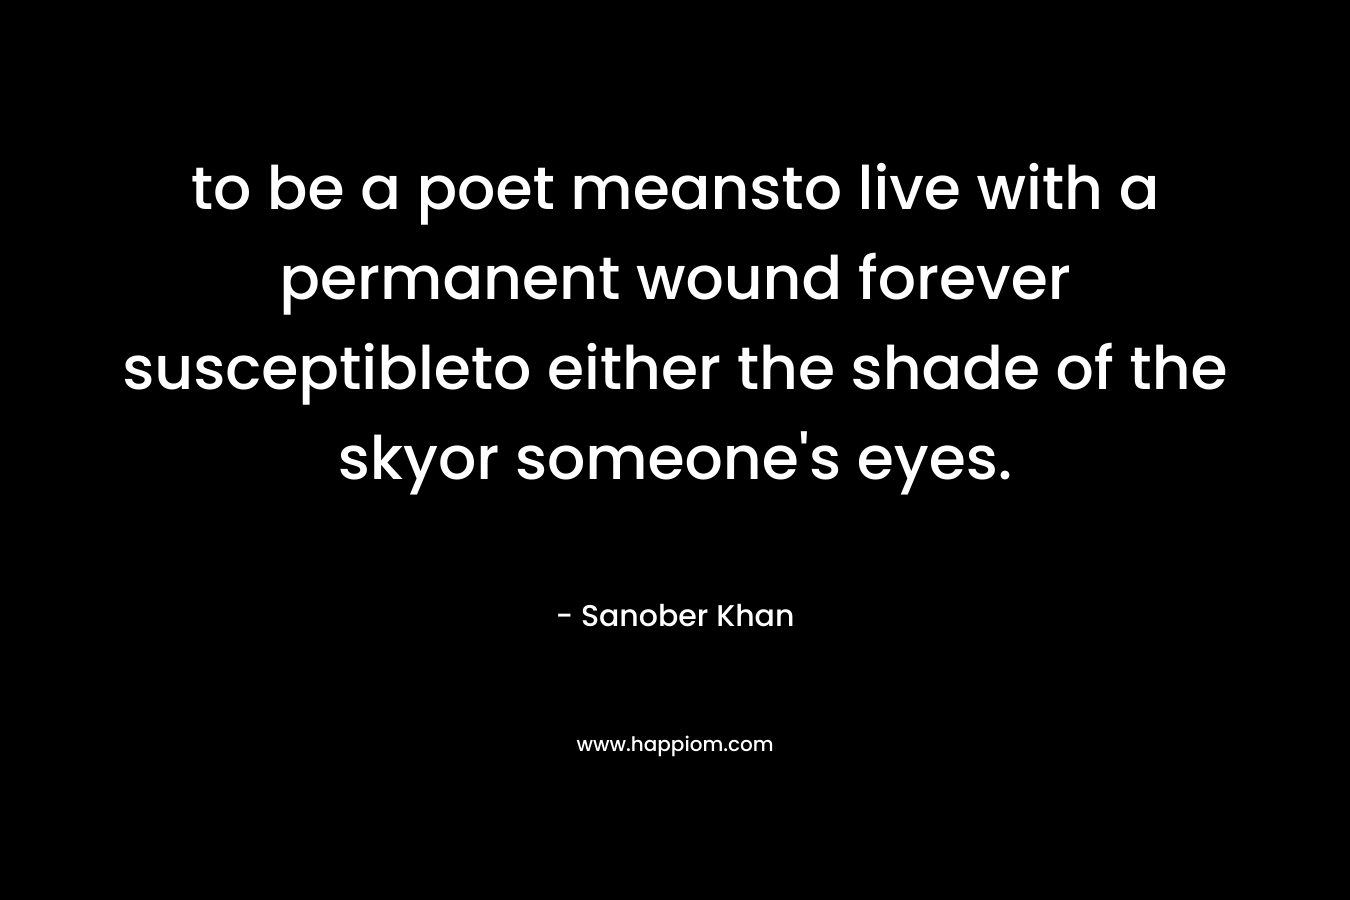 to be a poet meansto live with a permanent wound forever susceptibleto either the shade of the skyor someone's eyes.